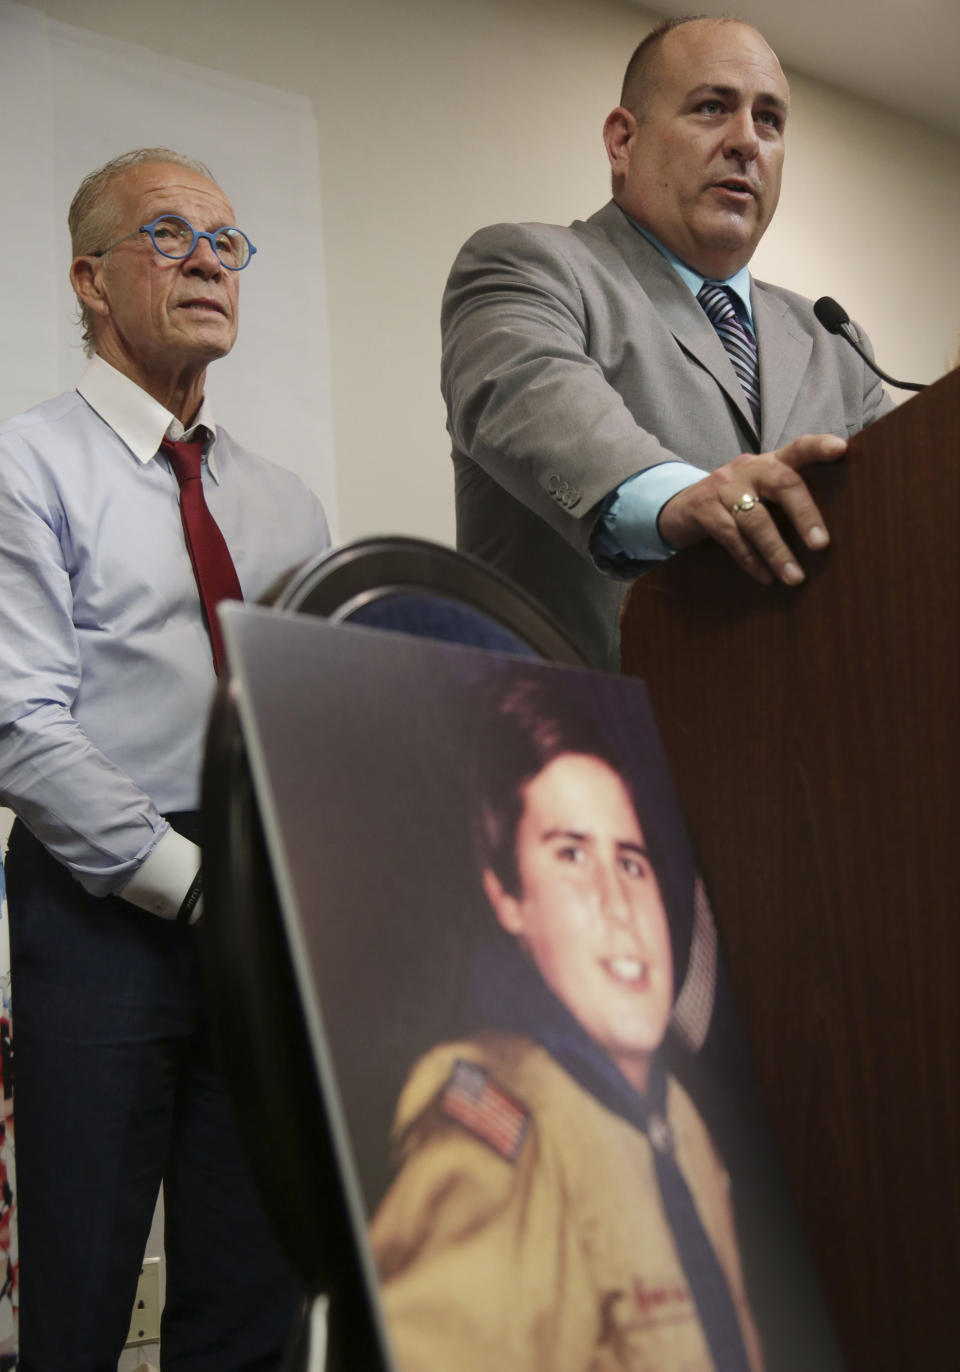 A picture of Richard Halvorson as a boy scout in 1982, when he was 11-years-old, is displayed while Halvorson, right, and attorney Jeff Anderson speak during a news conference in Newark, N.J., Tuesday, April 30, 2019. Halvorson is alleging sexual abuse in a lawsuit filed against the Boy Scouts of America. (AP Photo/Seth Wenig)